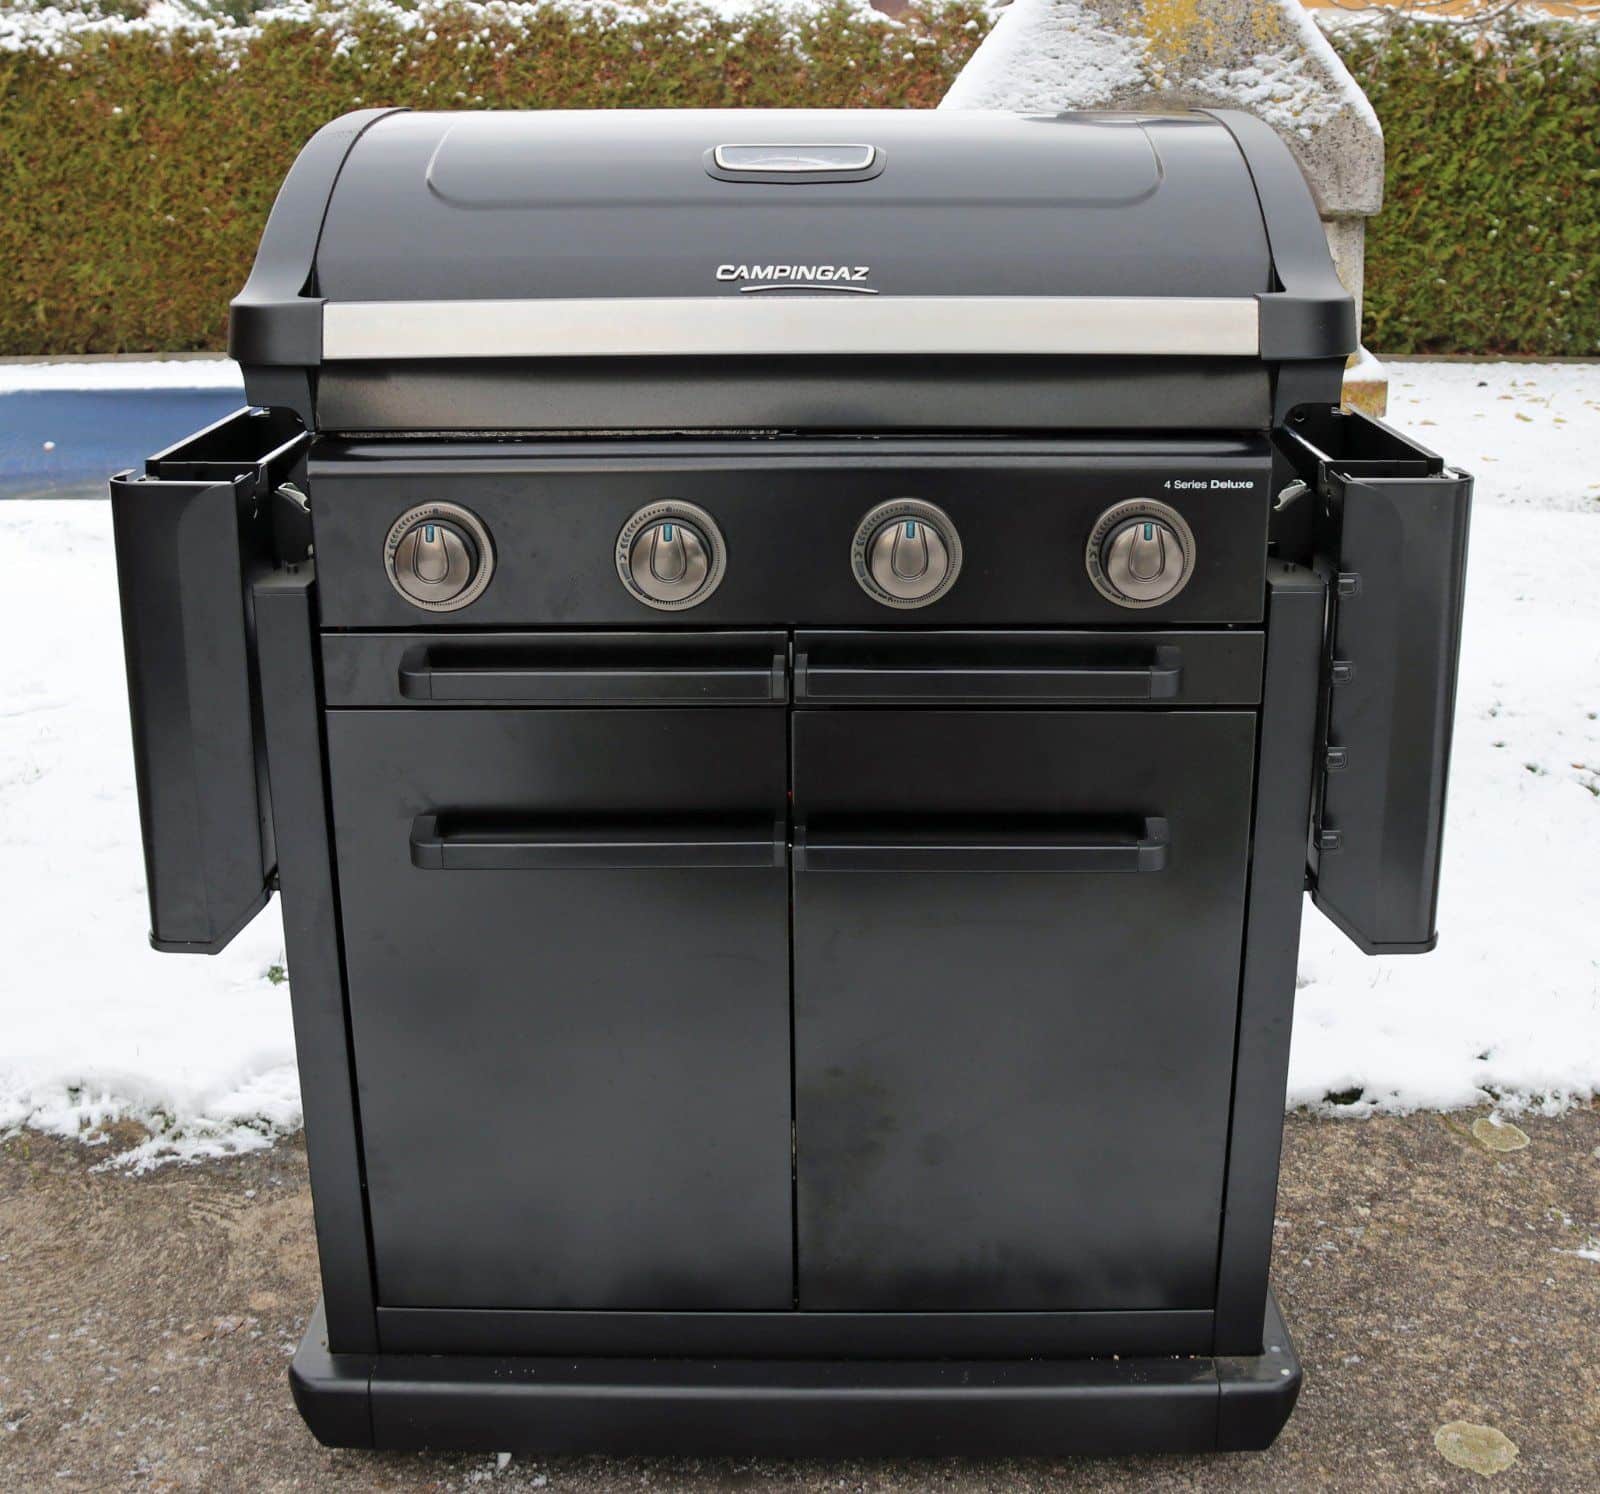 Campingaz 4 Series Deluxe Gasgrill